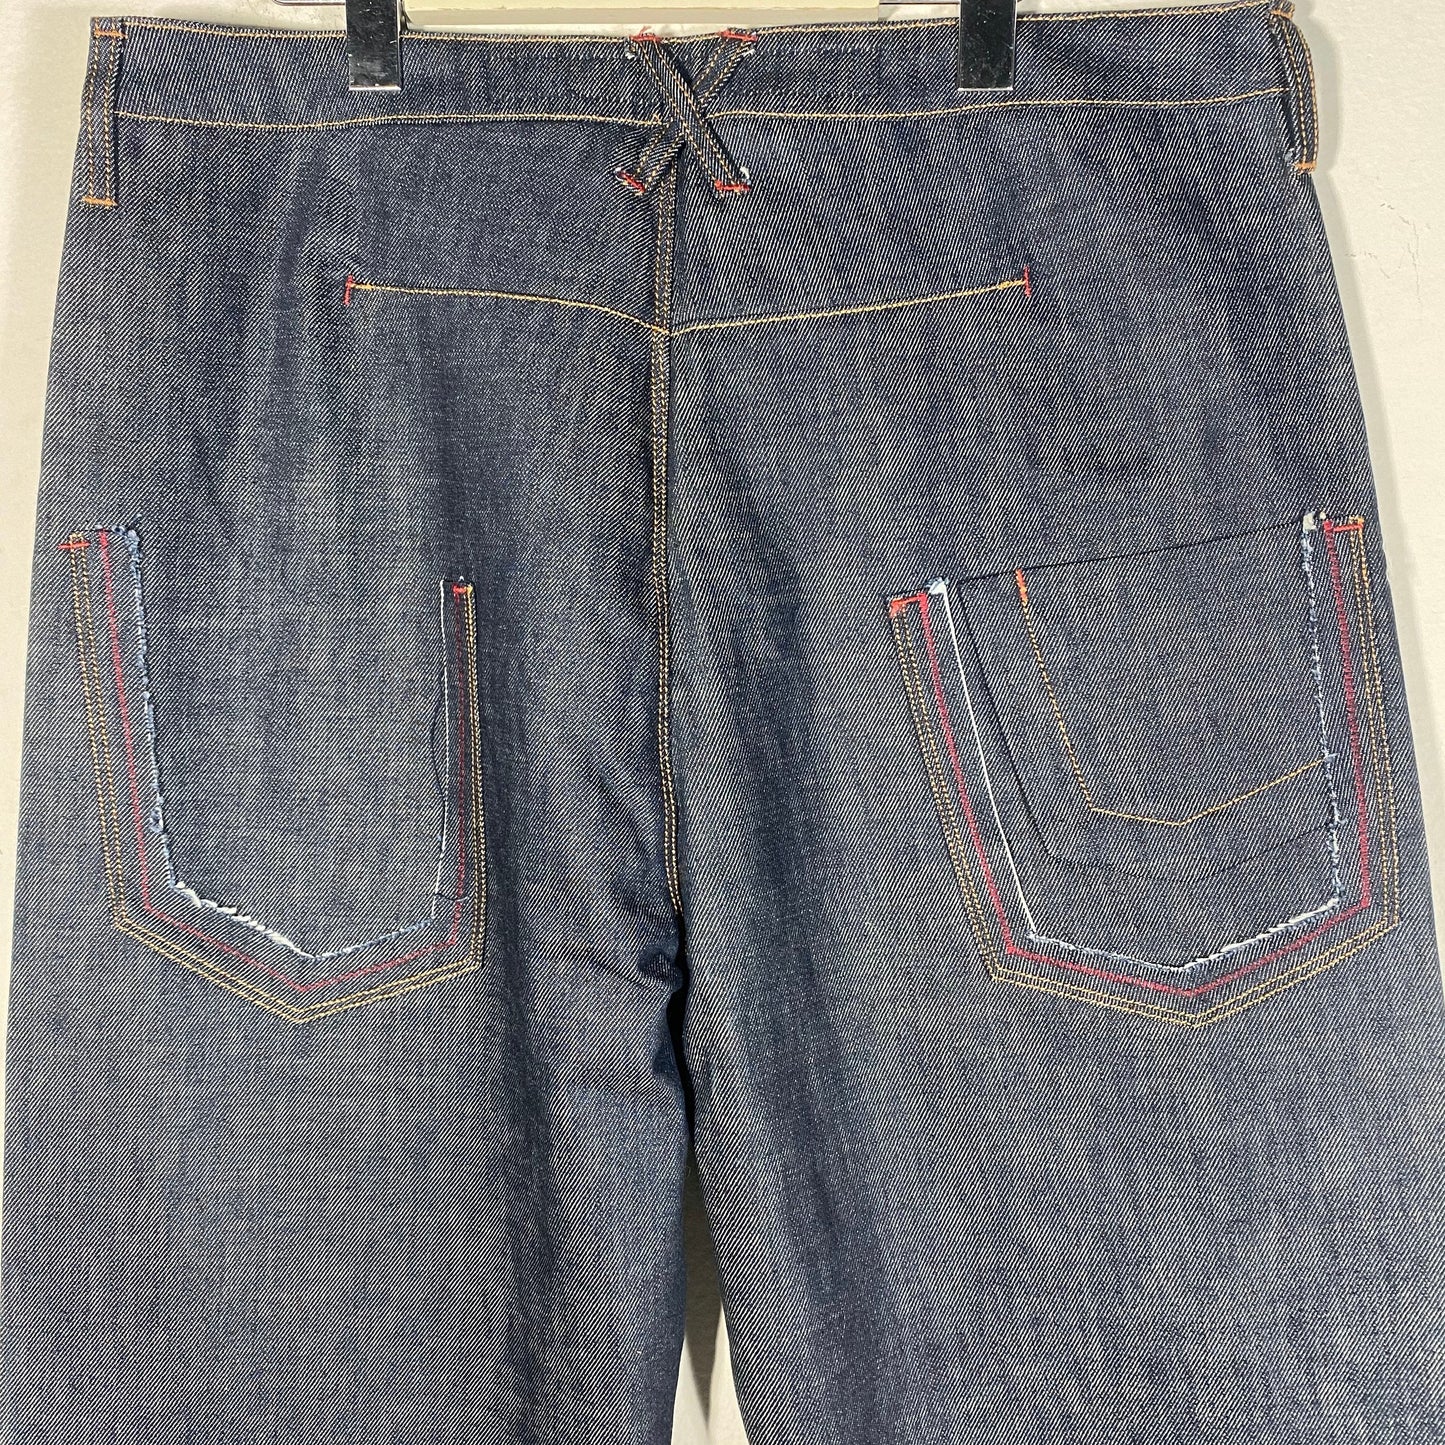 Marithe F. Girbaud vintage engineered denim trousers / jeans, new with tags 90s sizes 30, 33 available